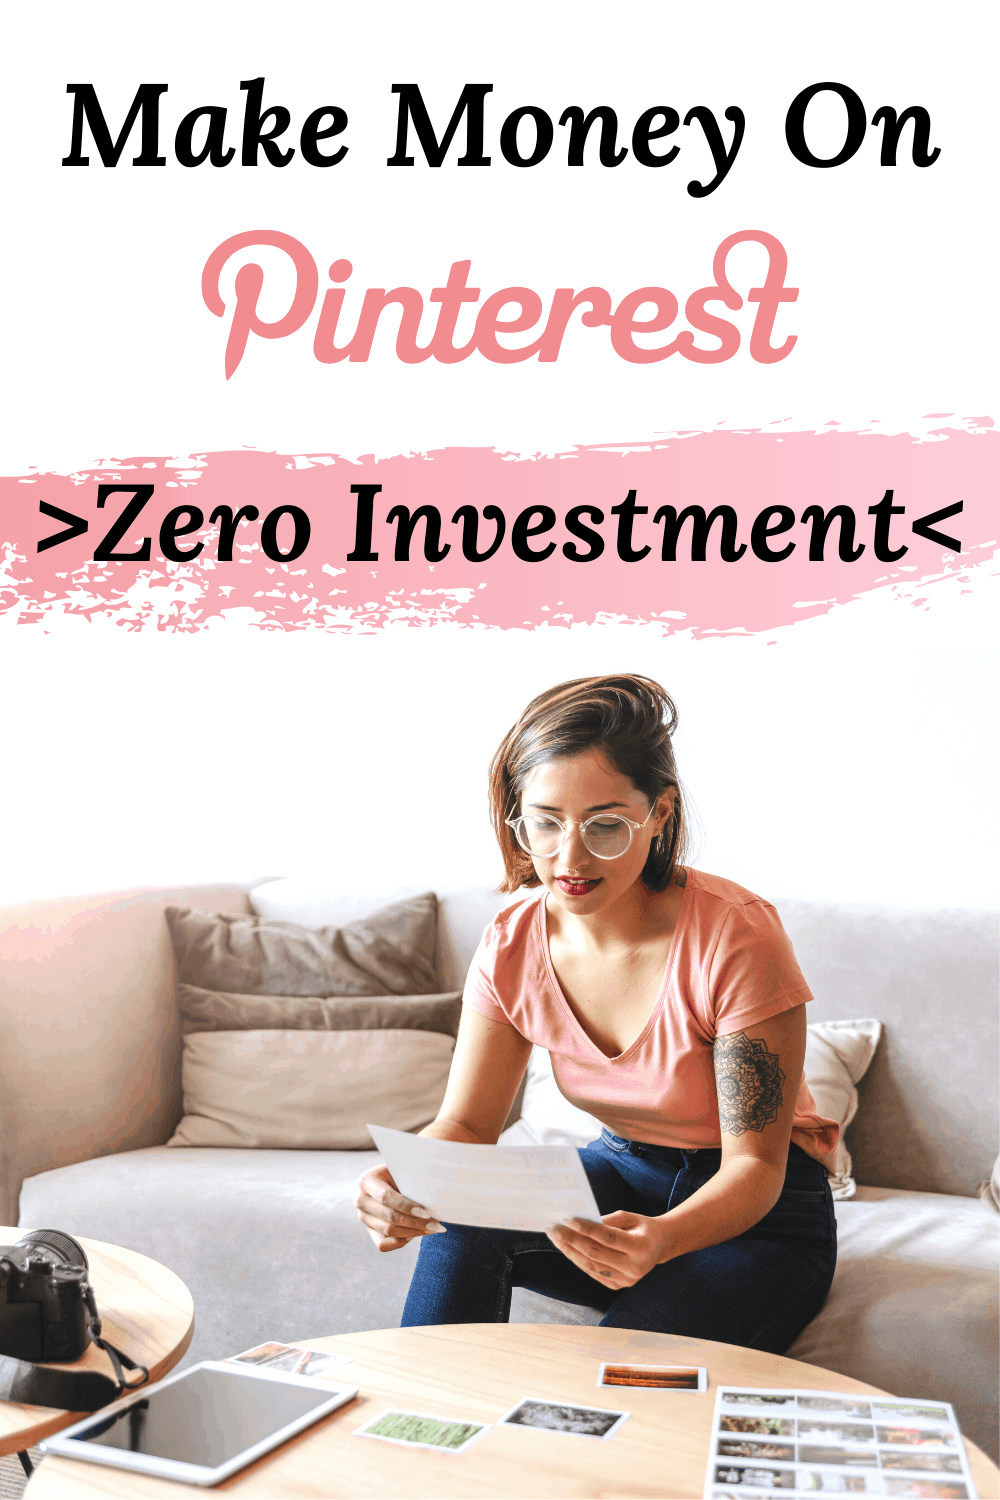 Make money on Pinterest with affiliate marketing. Learn how to use affiliate links to make money with or without a blog. Make money online